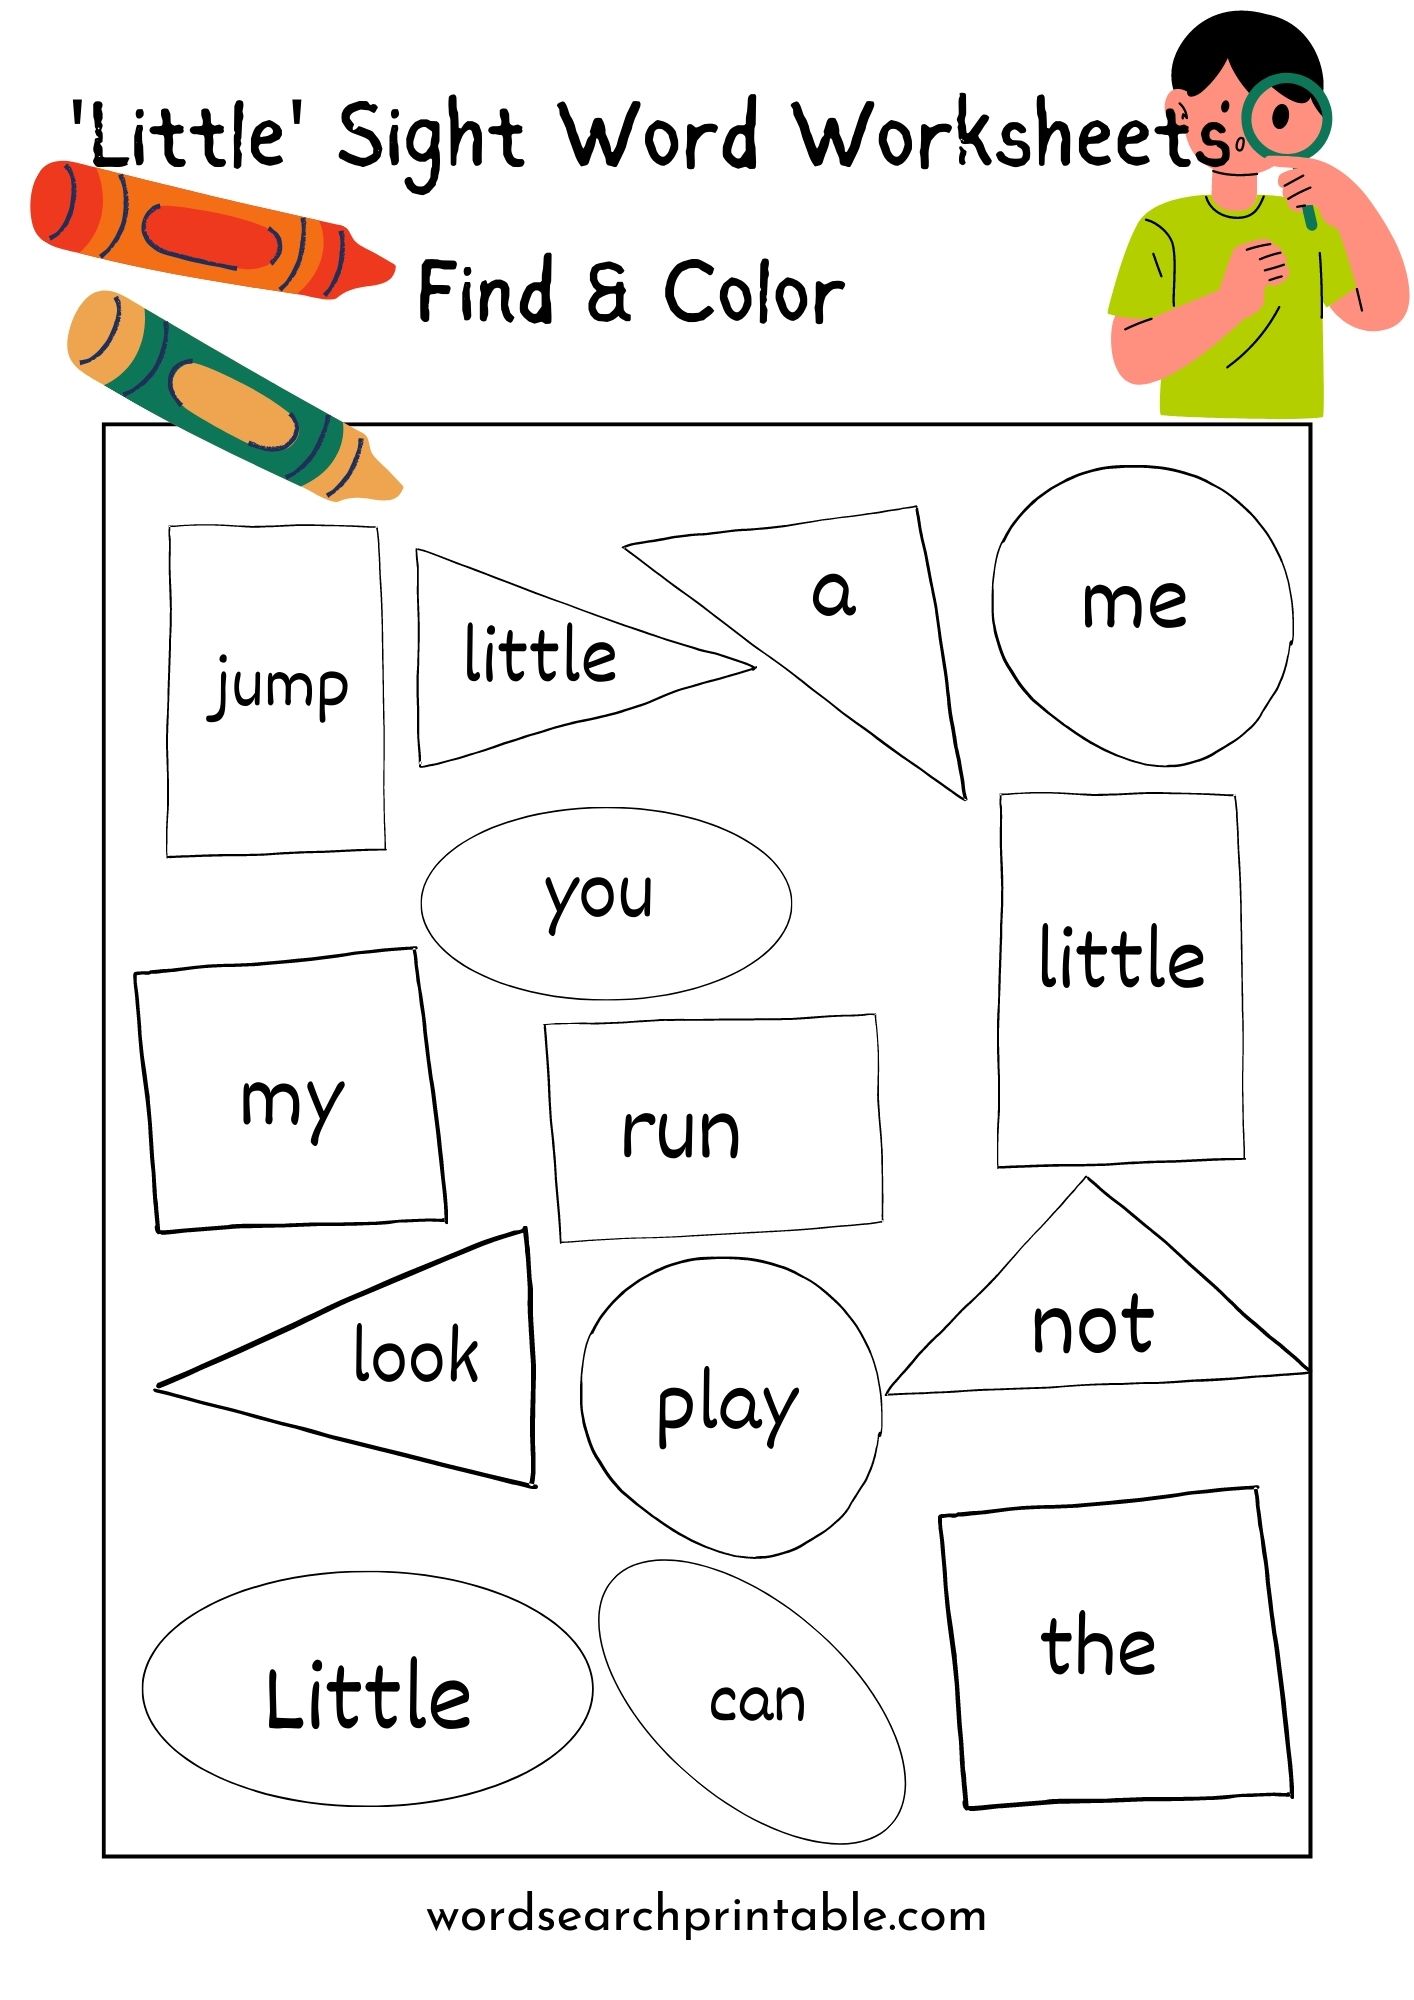 Find the sight word Little and Color the geometric shape